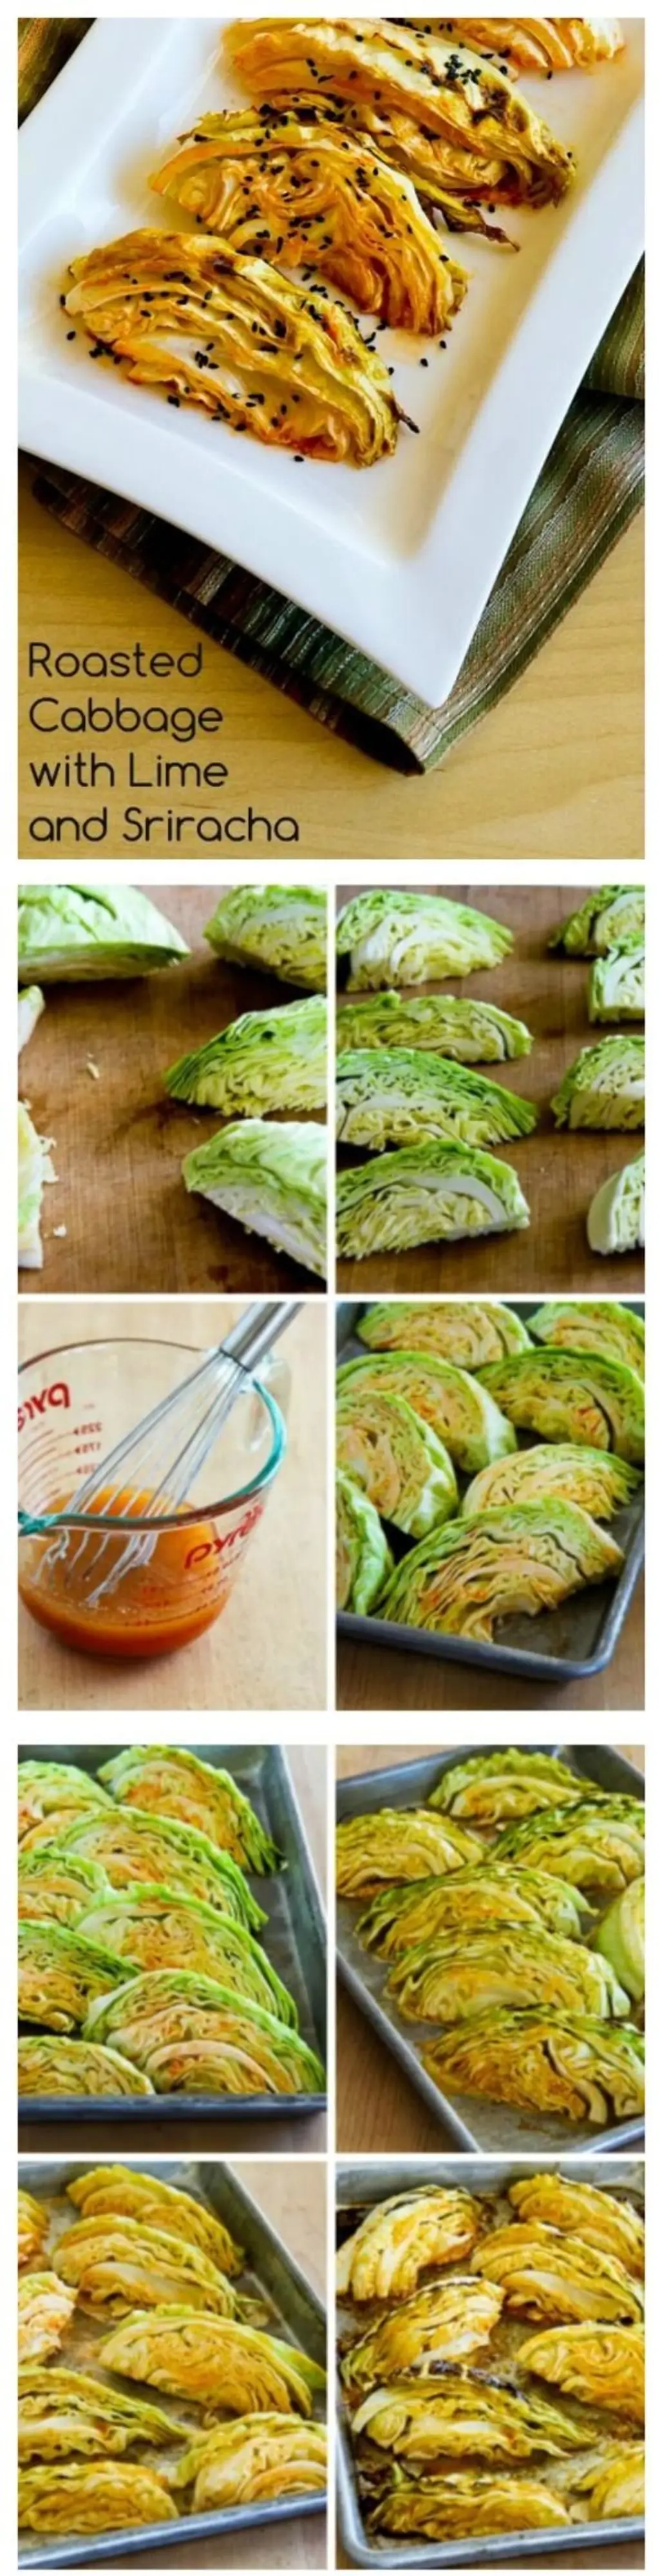 Roasted Cabbage with Lime and Sriracha